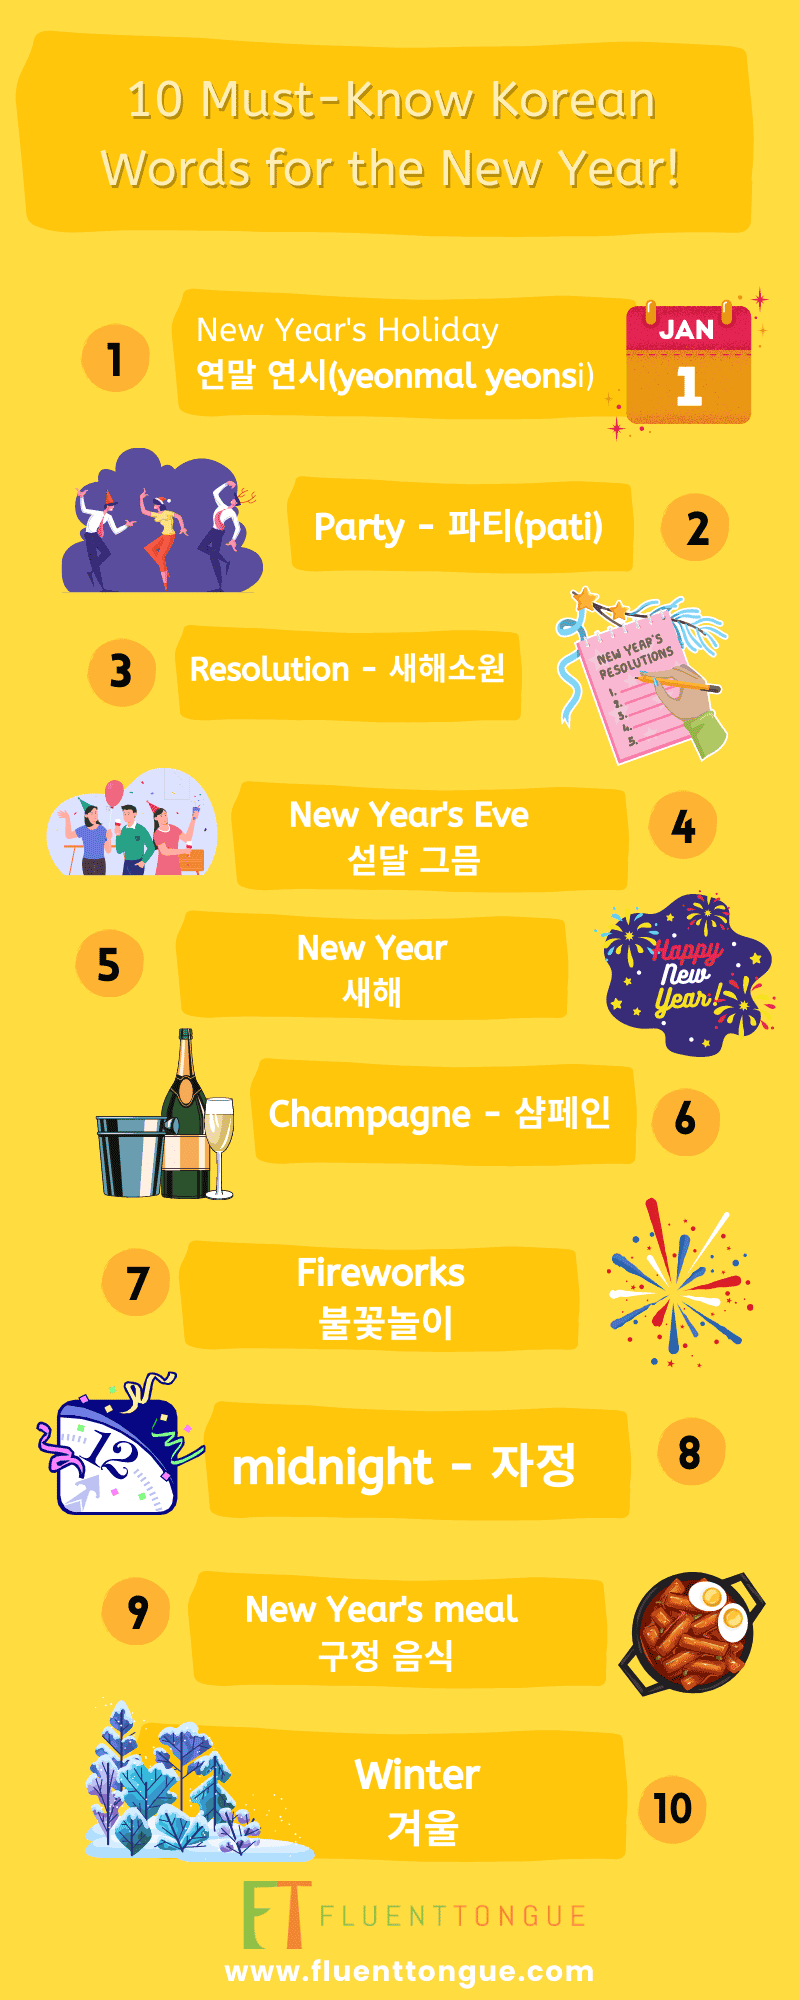 10 must-know words for the happy new year in Korean